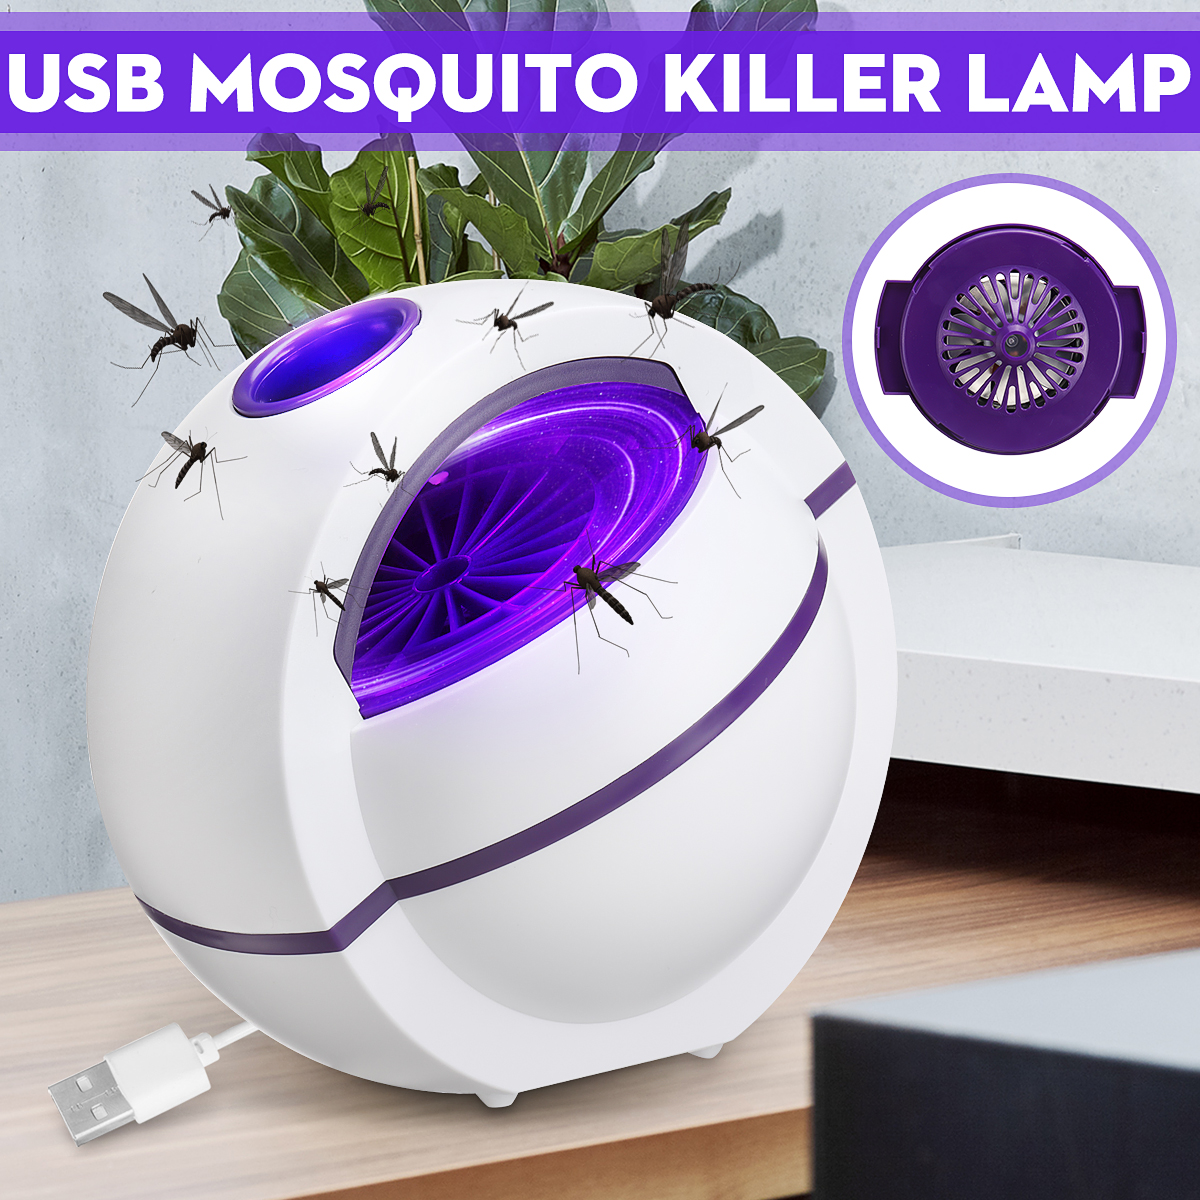 LED-Mosquito-Insect-Killer-Lamp-USB-Quiet-Fly-Bug-Zapper-Pest-Control-Light-No-Radiation-1670303-2